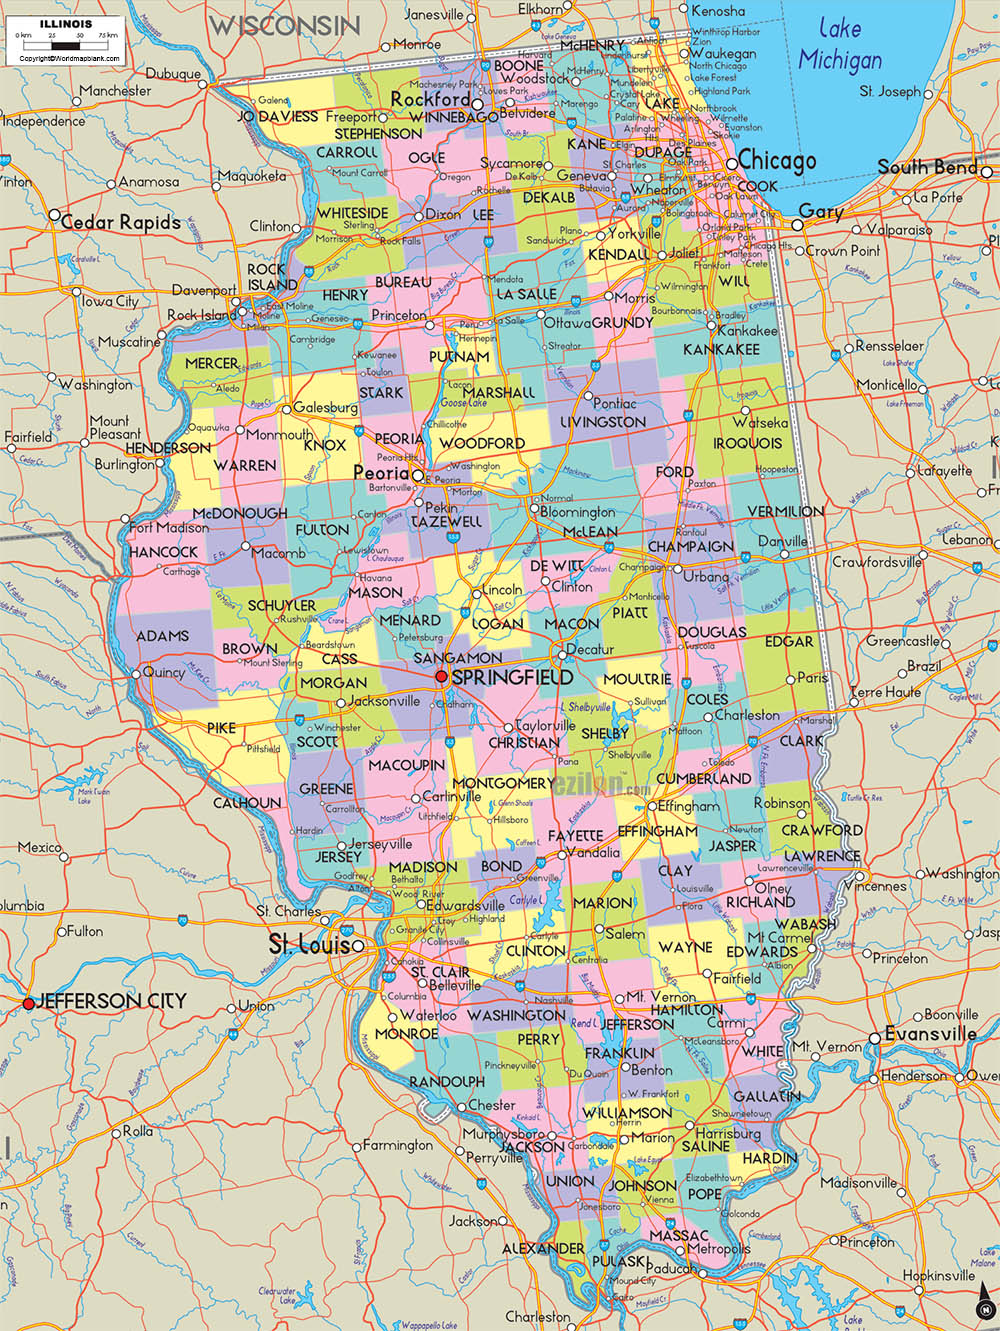 Labeled Map of Illinois